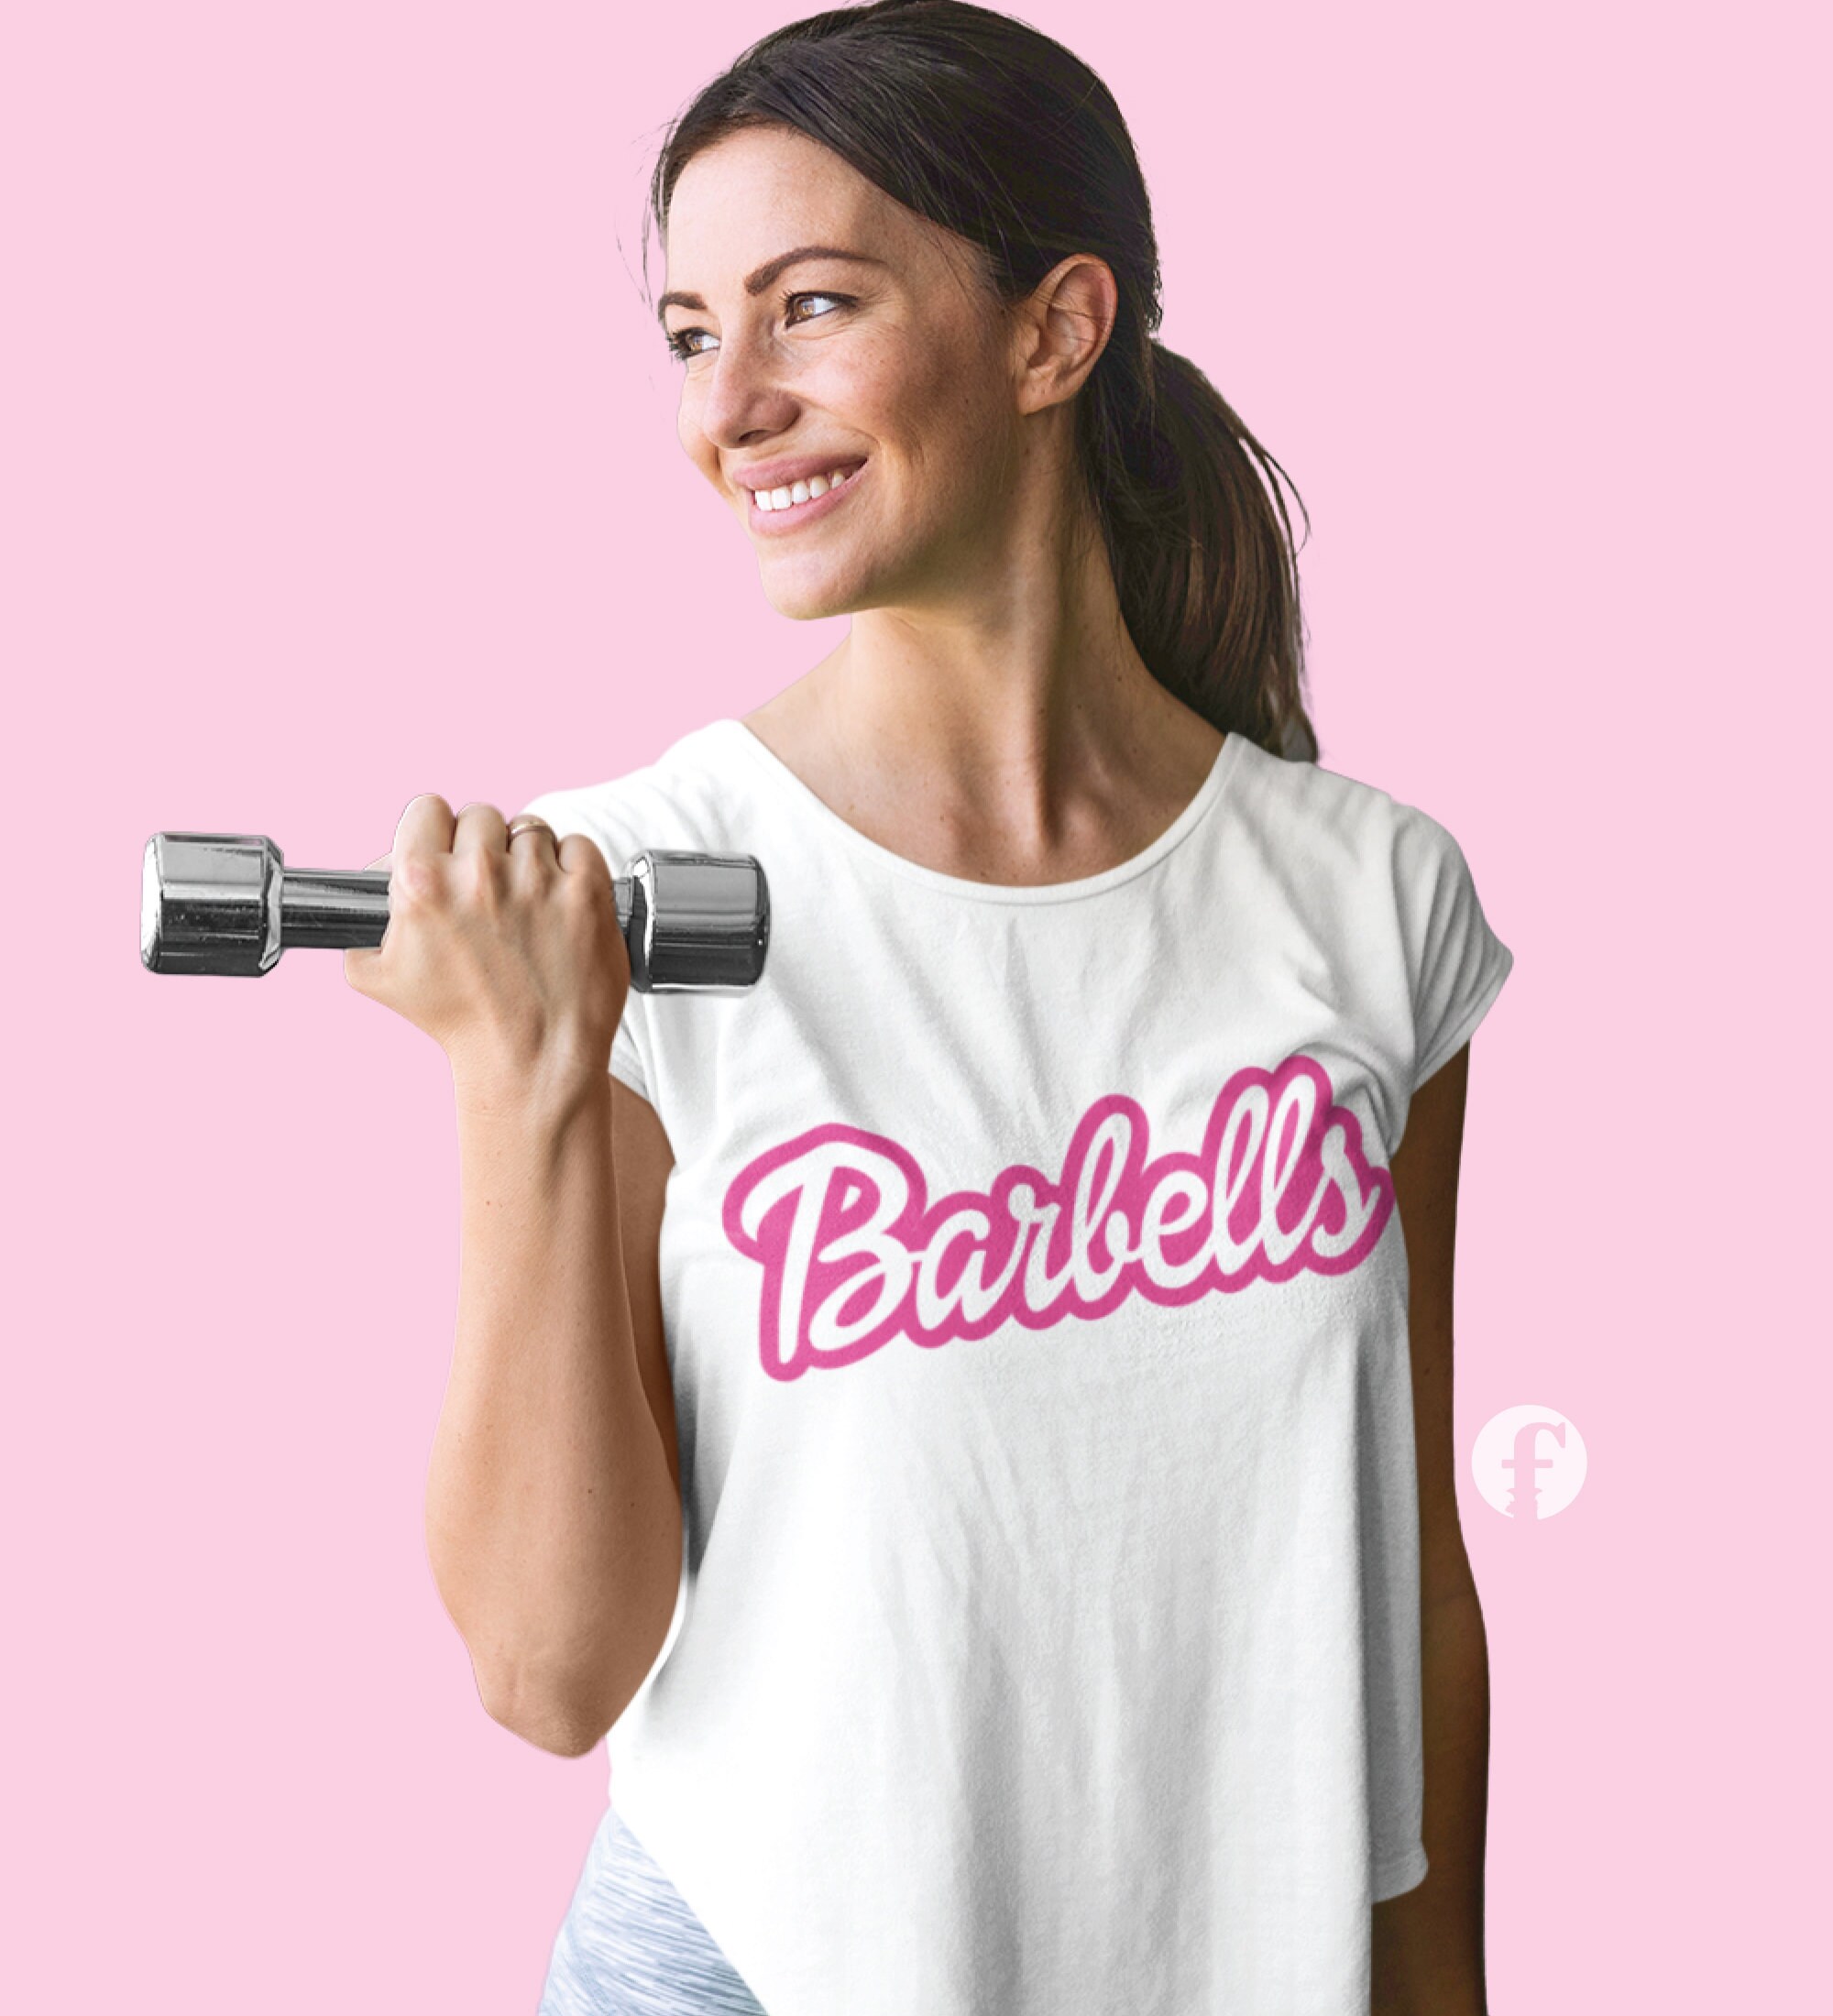 Straps Lifting Crossfit Gym Mujer Barbie